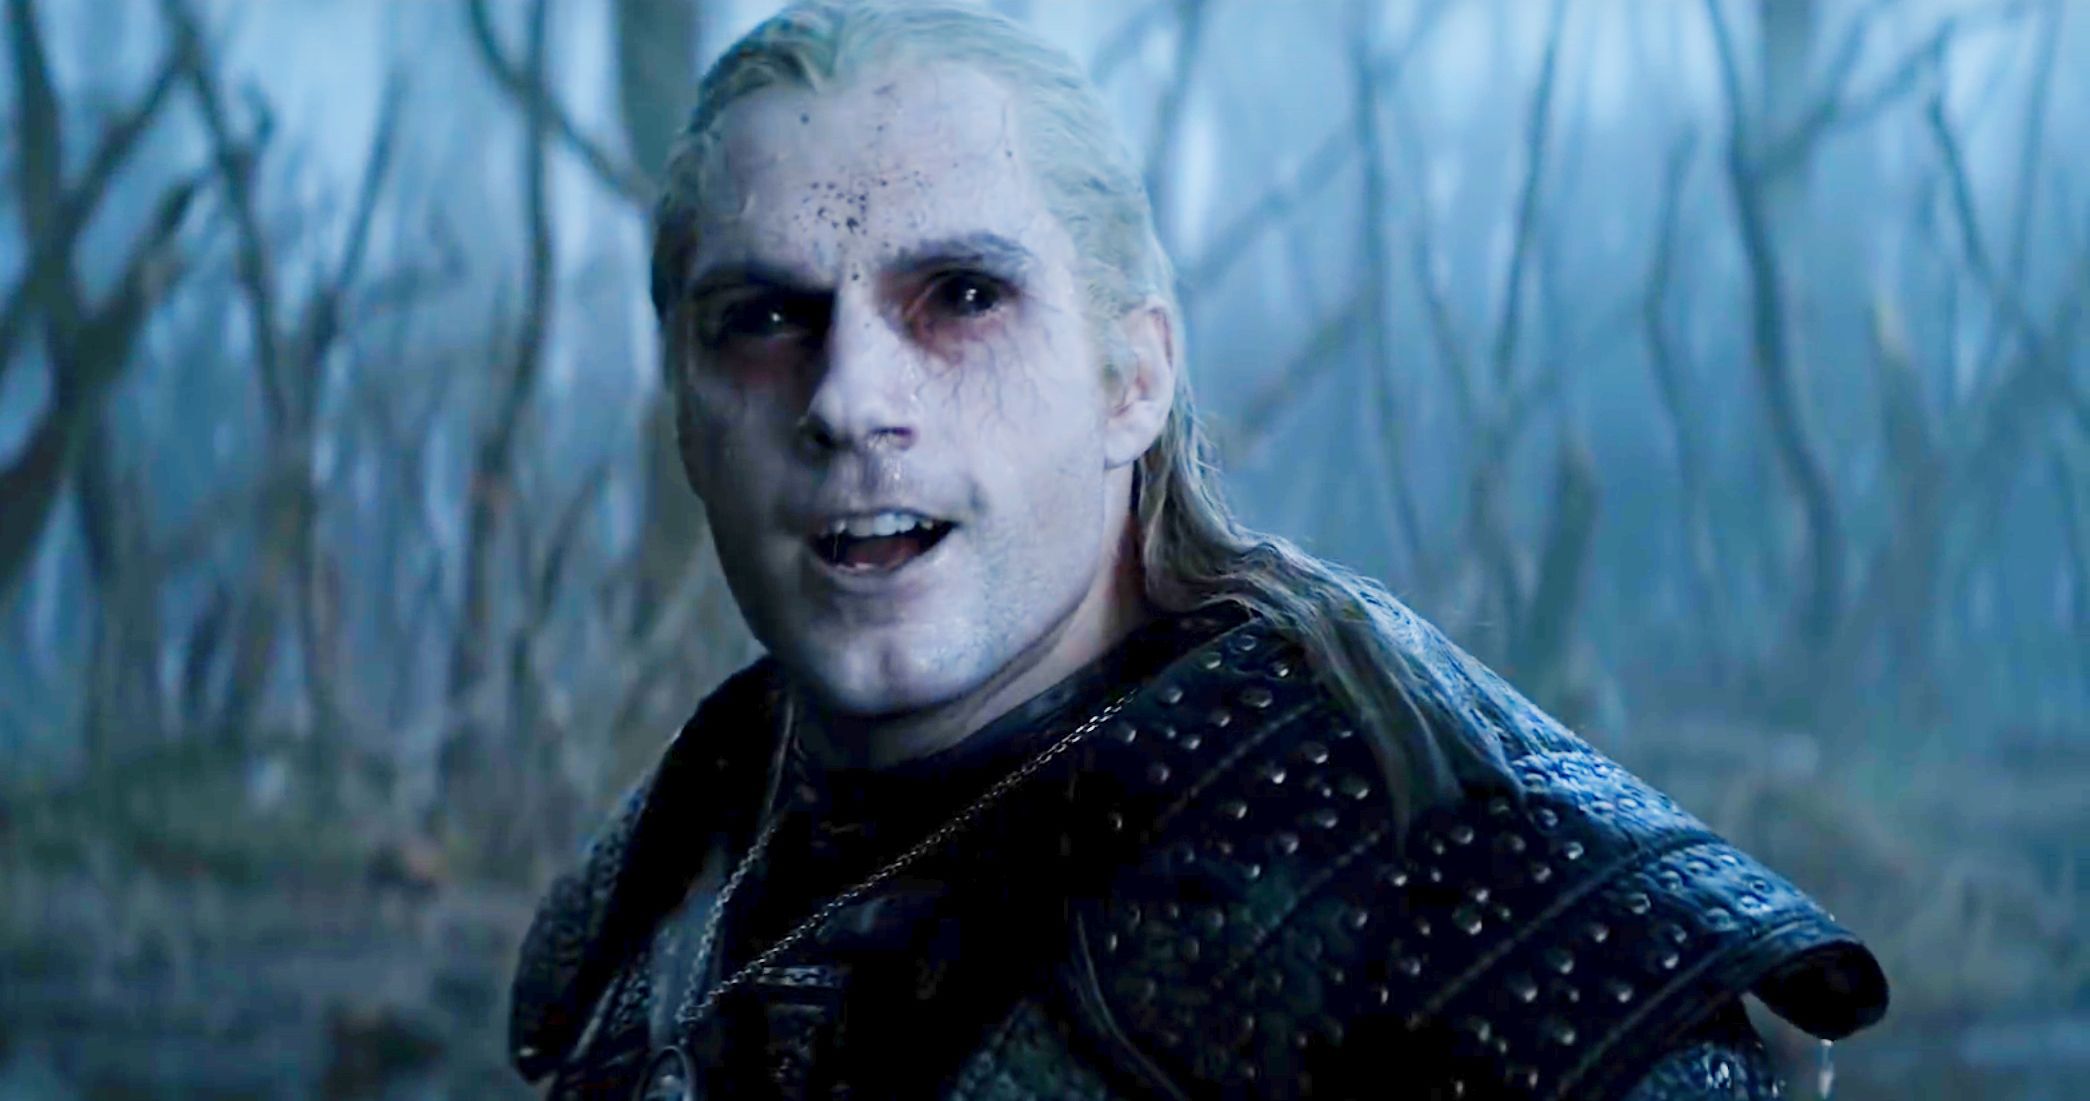 The Witcher Season 2 Trailer Has Henry Cavill's Geralt Ready for War This December